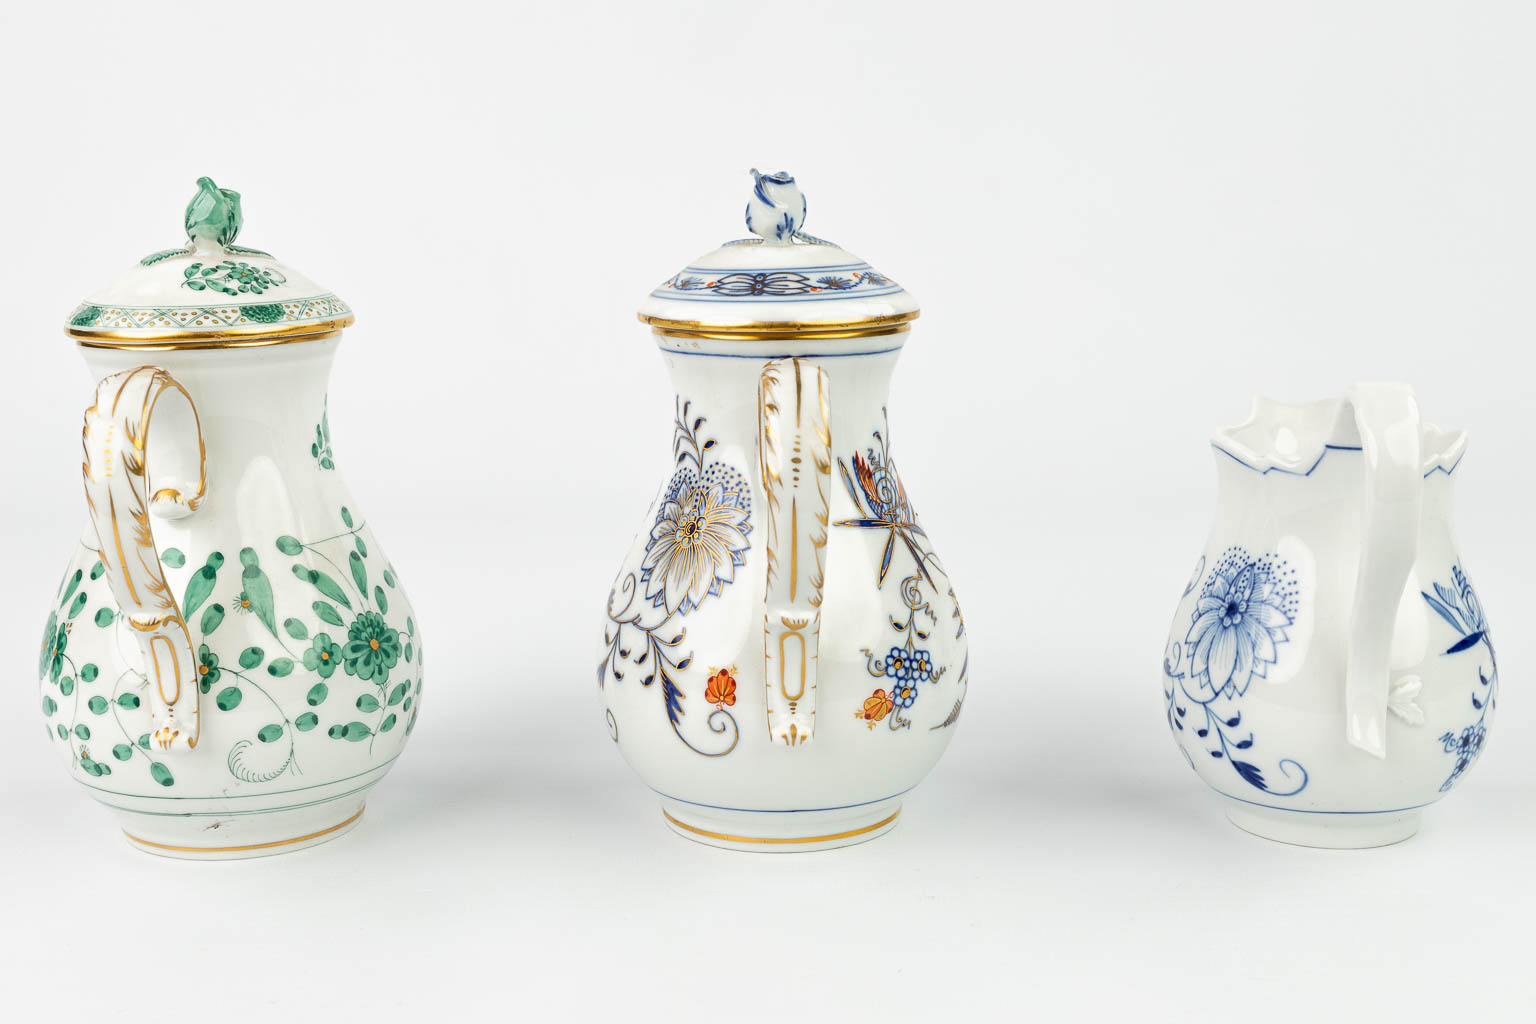 A collection of 2 coffee pots and a milk jug made by Meissen porcelain, 20th century. (H:17cm)